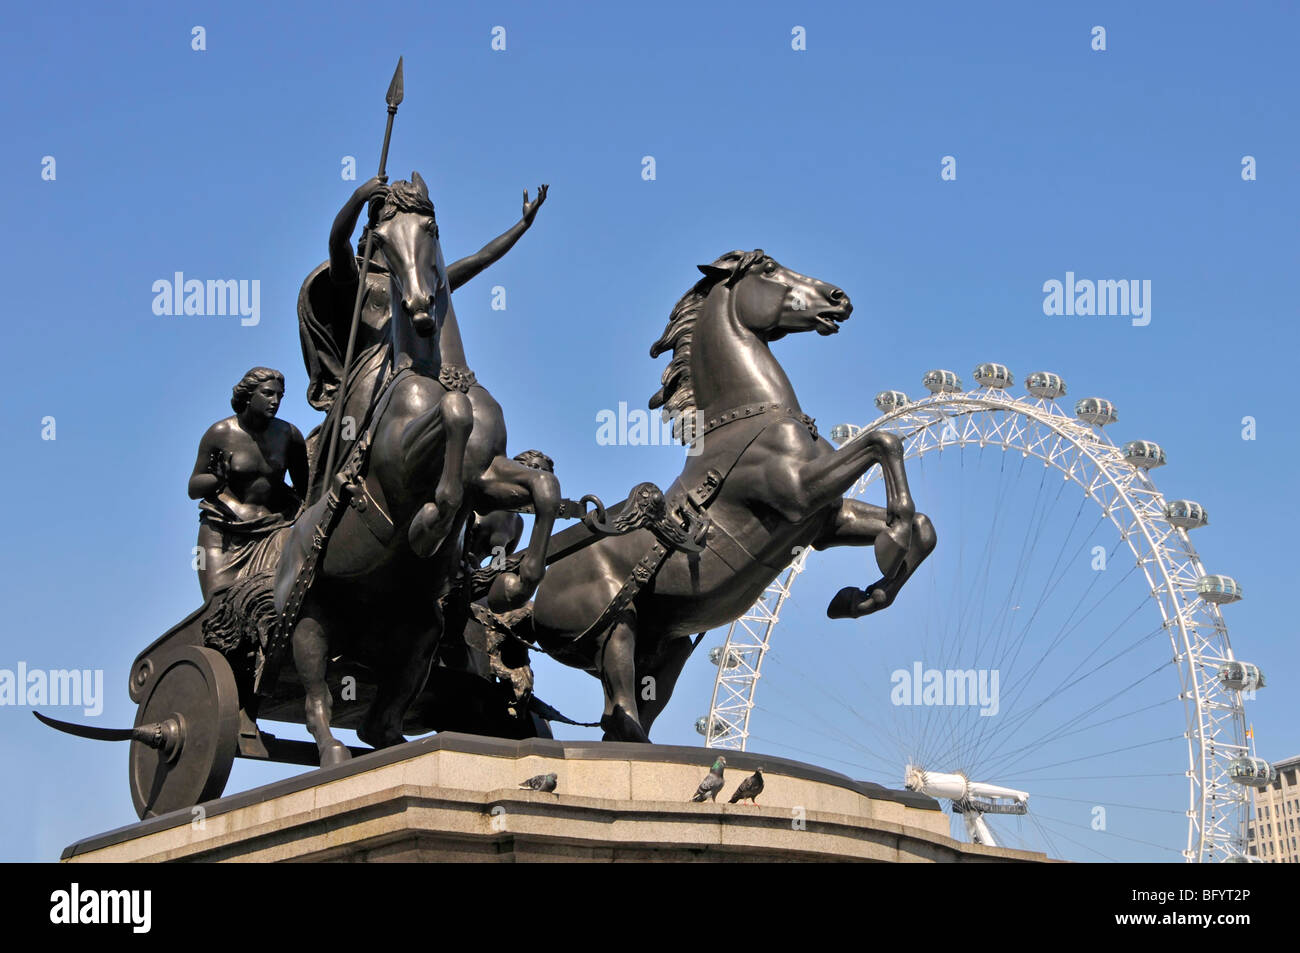 Statue of Queen Boudicca with part of the London eye ferris wheel Stock Photo